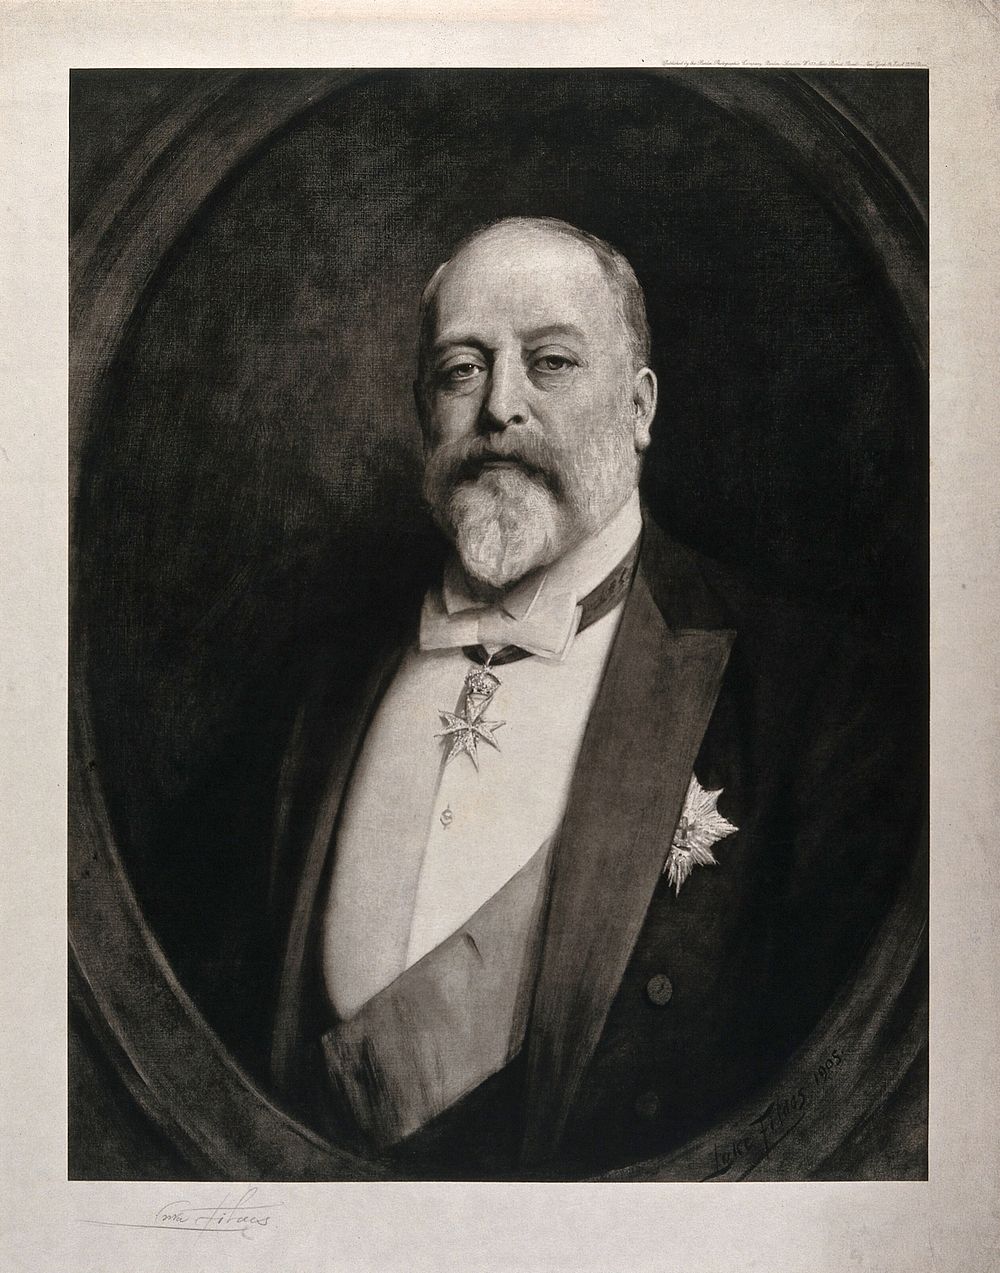 King Edward VII, head and shoulers. Photogravure after Luke Fildes, 1905.